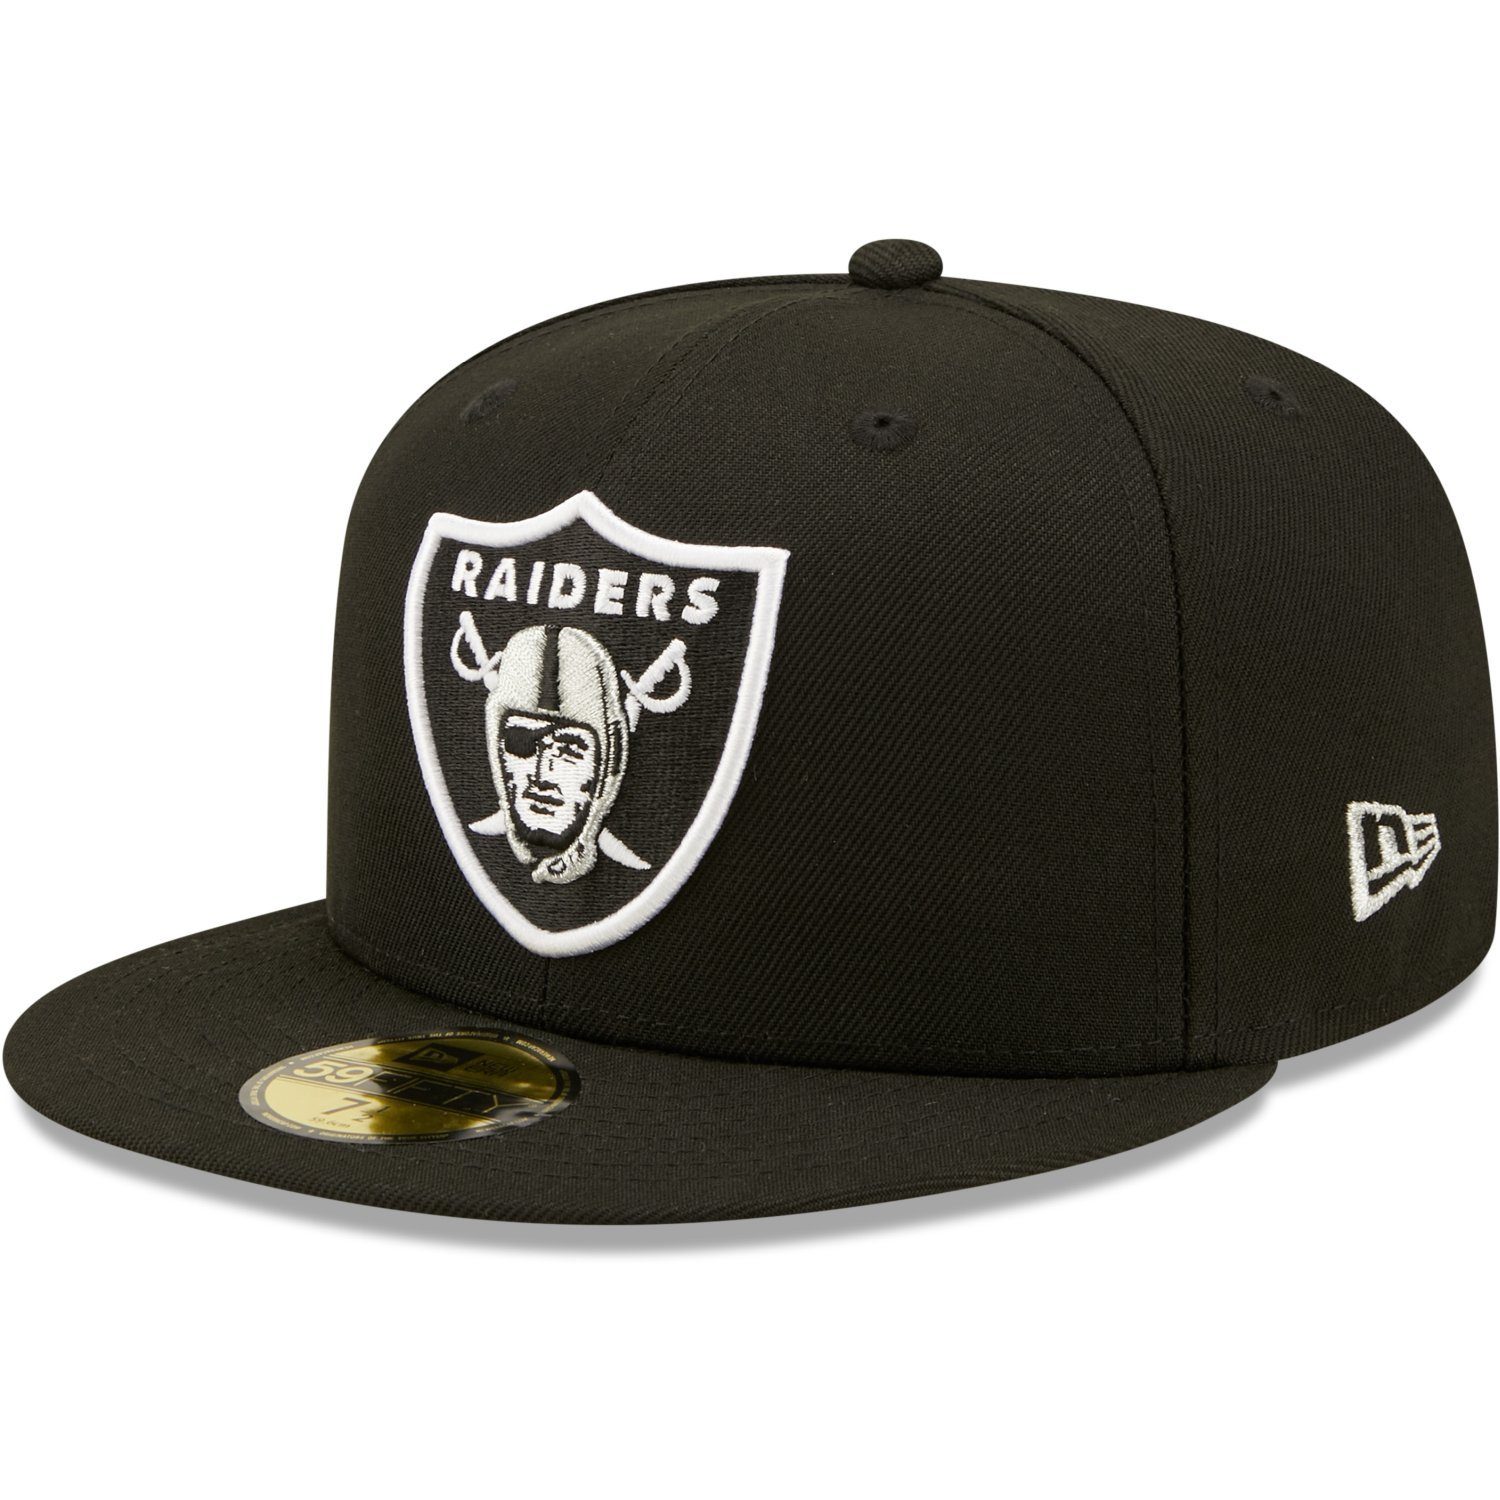 Cap Las 50 59Fifty Years Raiders New Fitted Era Vegas